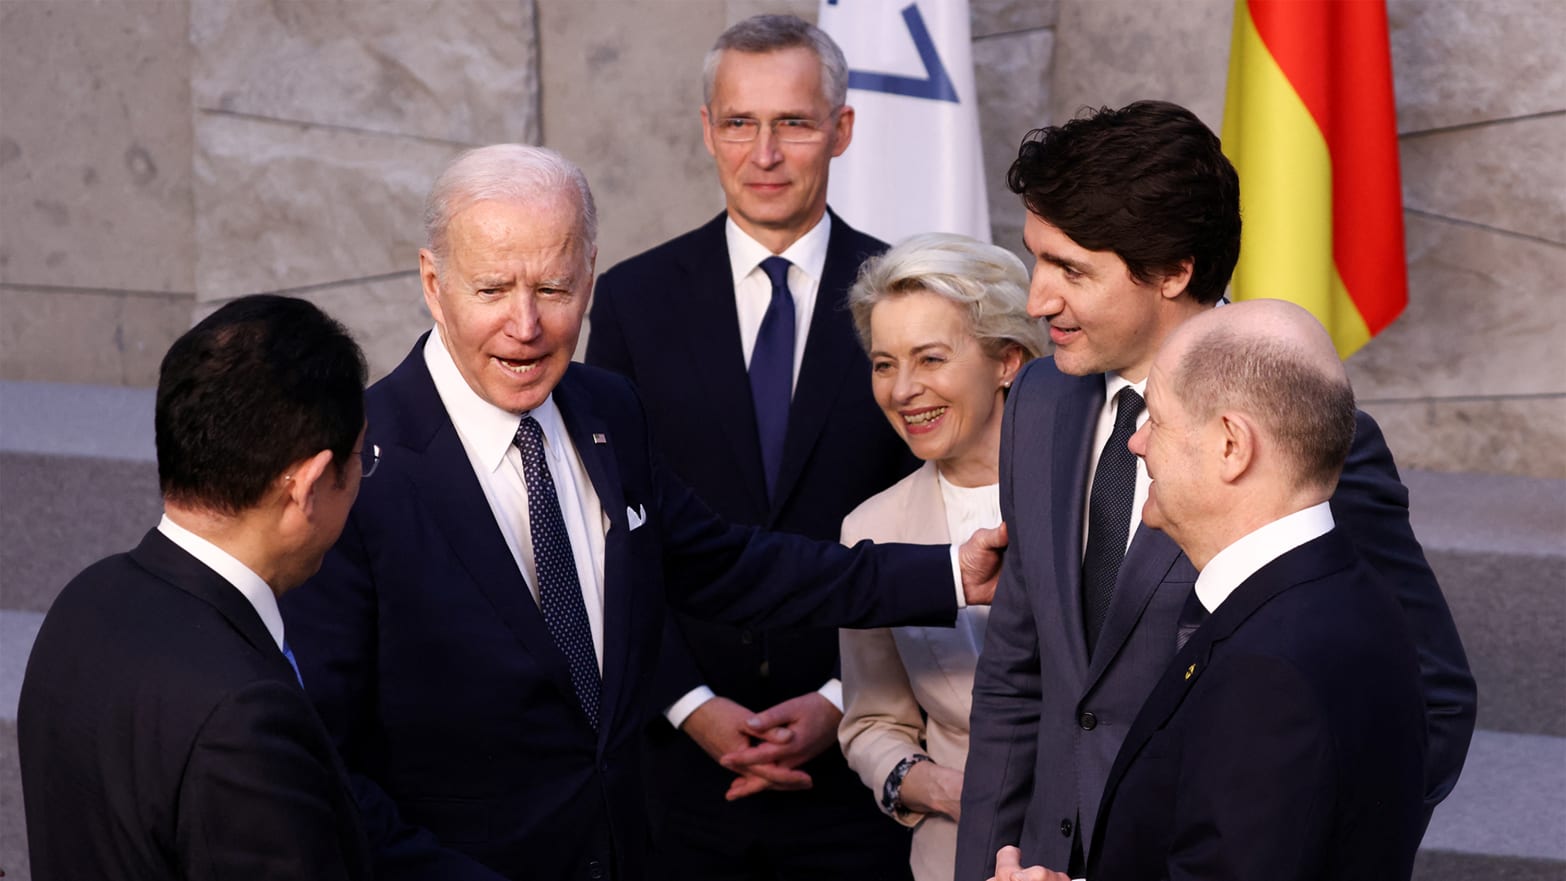 A photo of President Joe Biden meeting with world leaders during the 2022 NATO summit in Belgium.